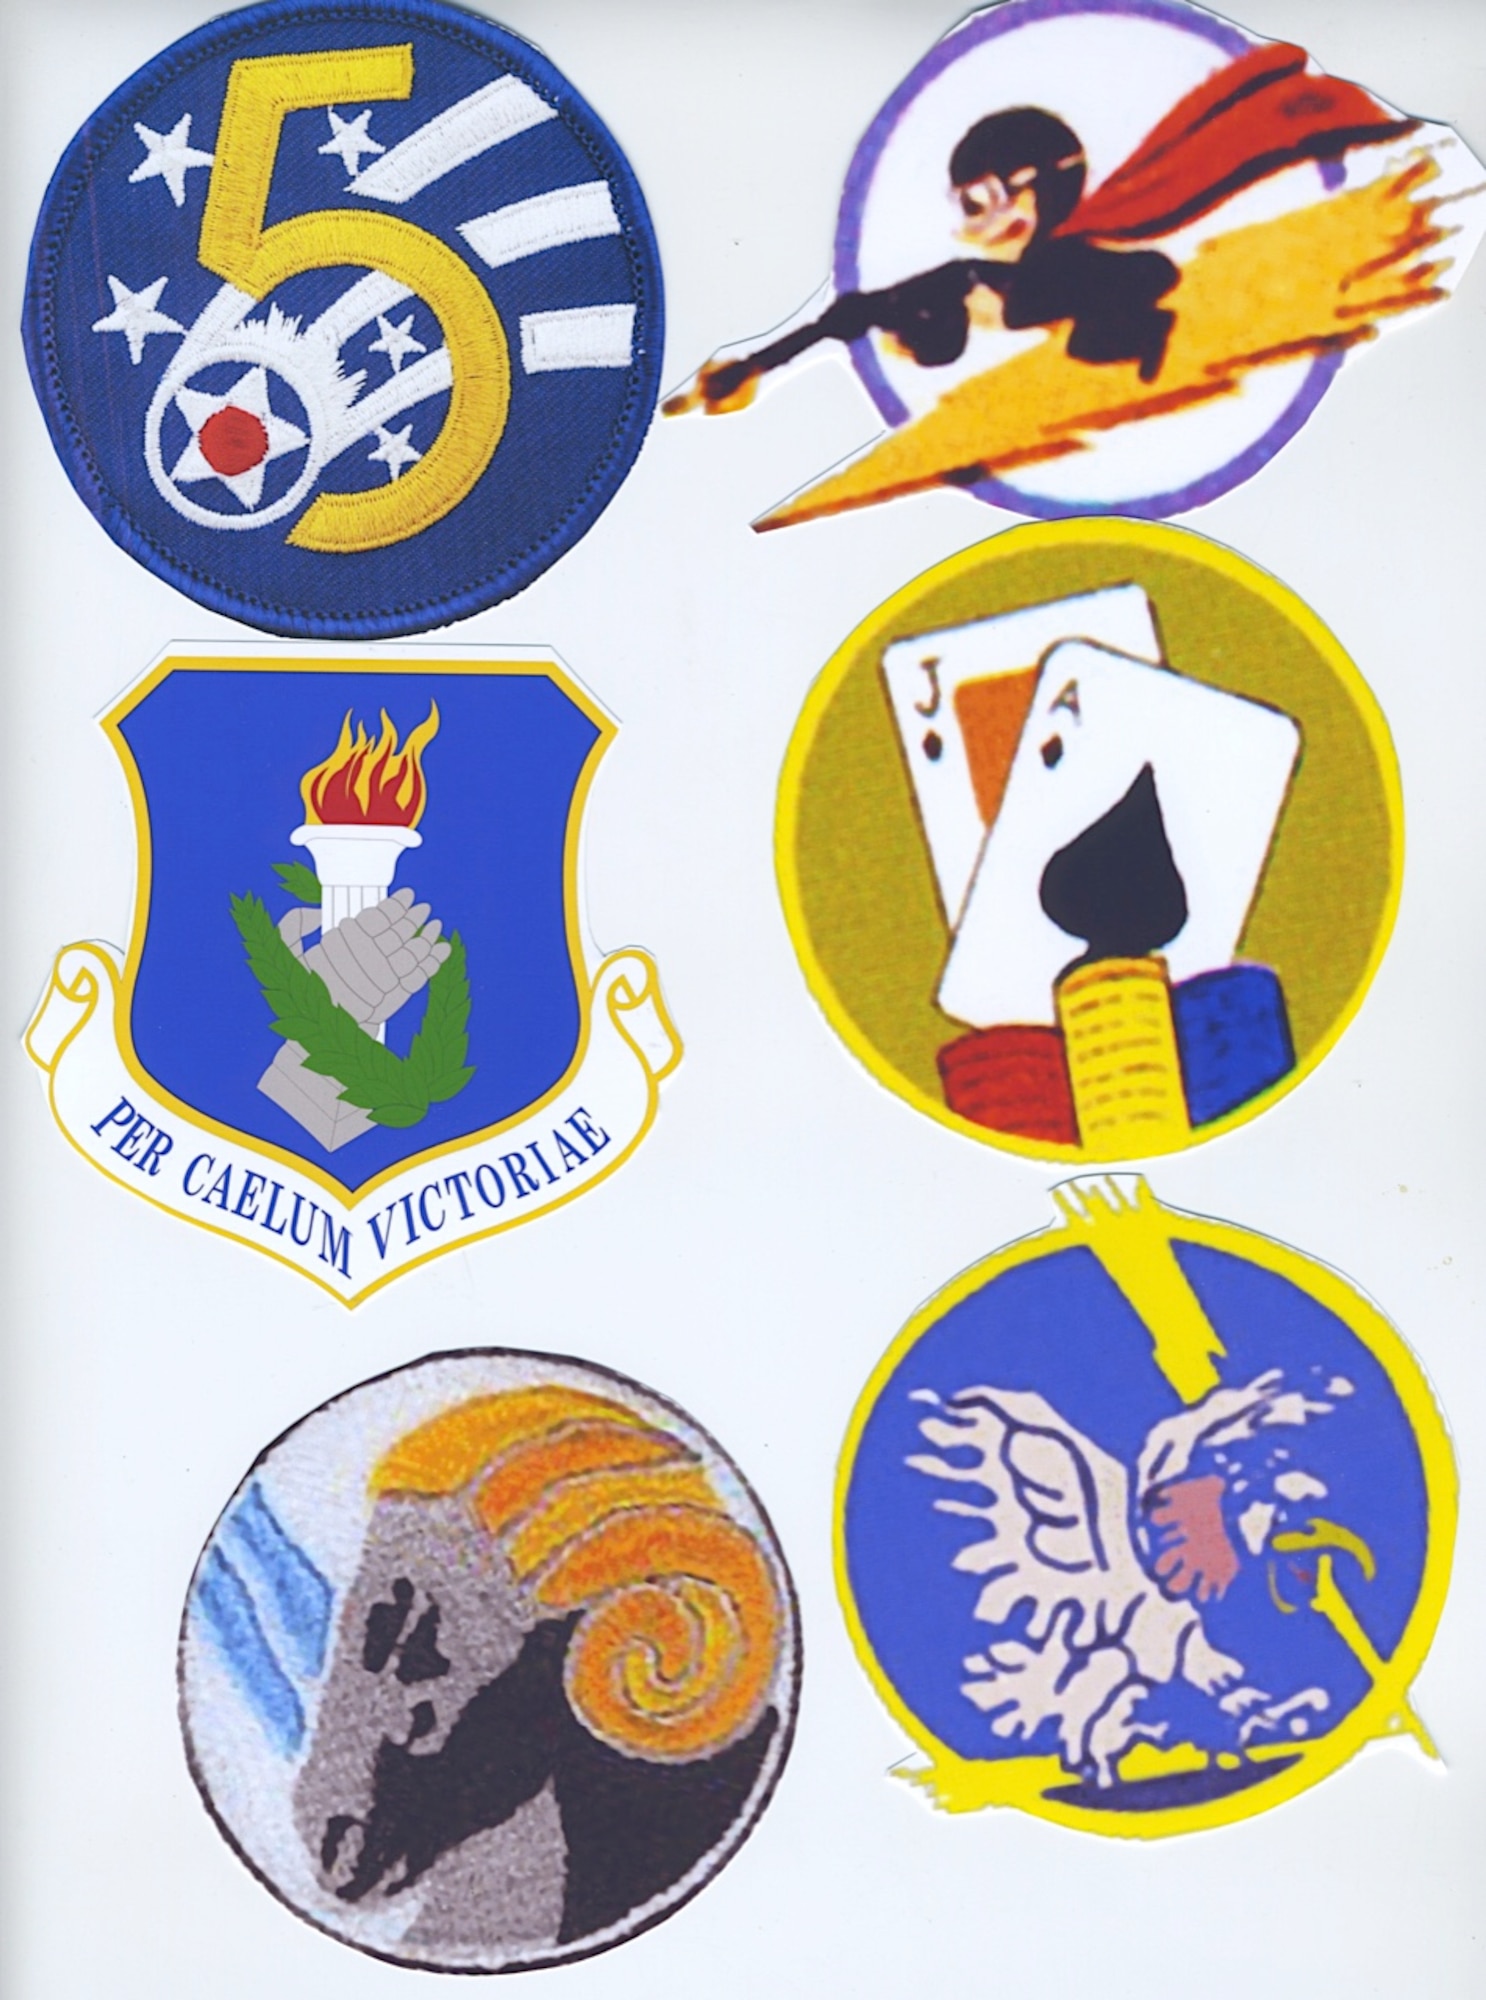 These insignia, going clockwise from the top left, represent the important organizations described in our history: Fifth Air Force, 340th Fighter Squadron, 341st Fighter Squadron, 342nd Fighter Squadron, 460th Fighter Squadron and 348th Fighter Group, 108th Wing. (author’s collection)